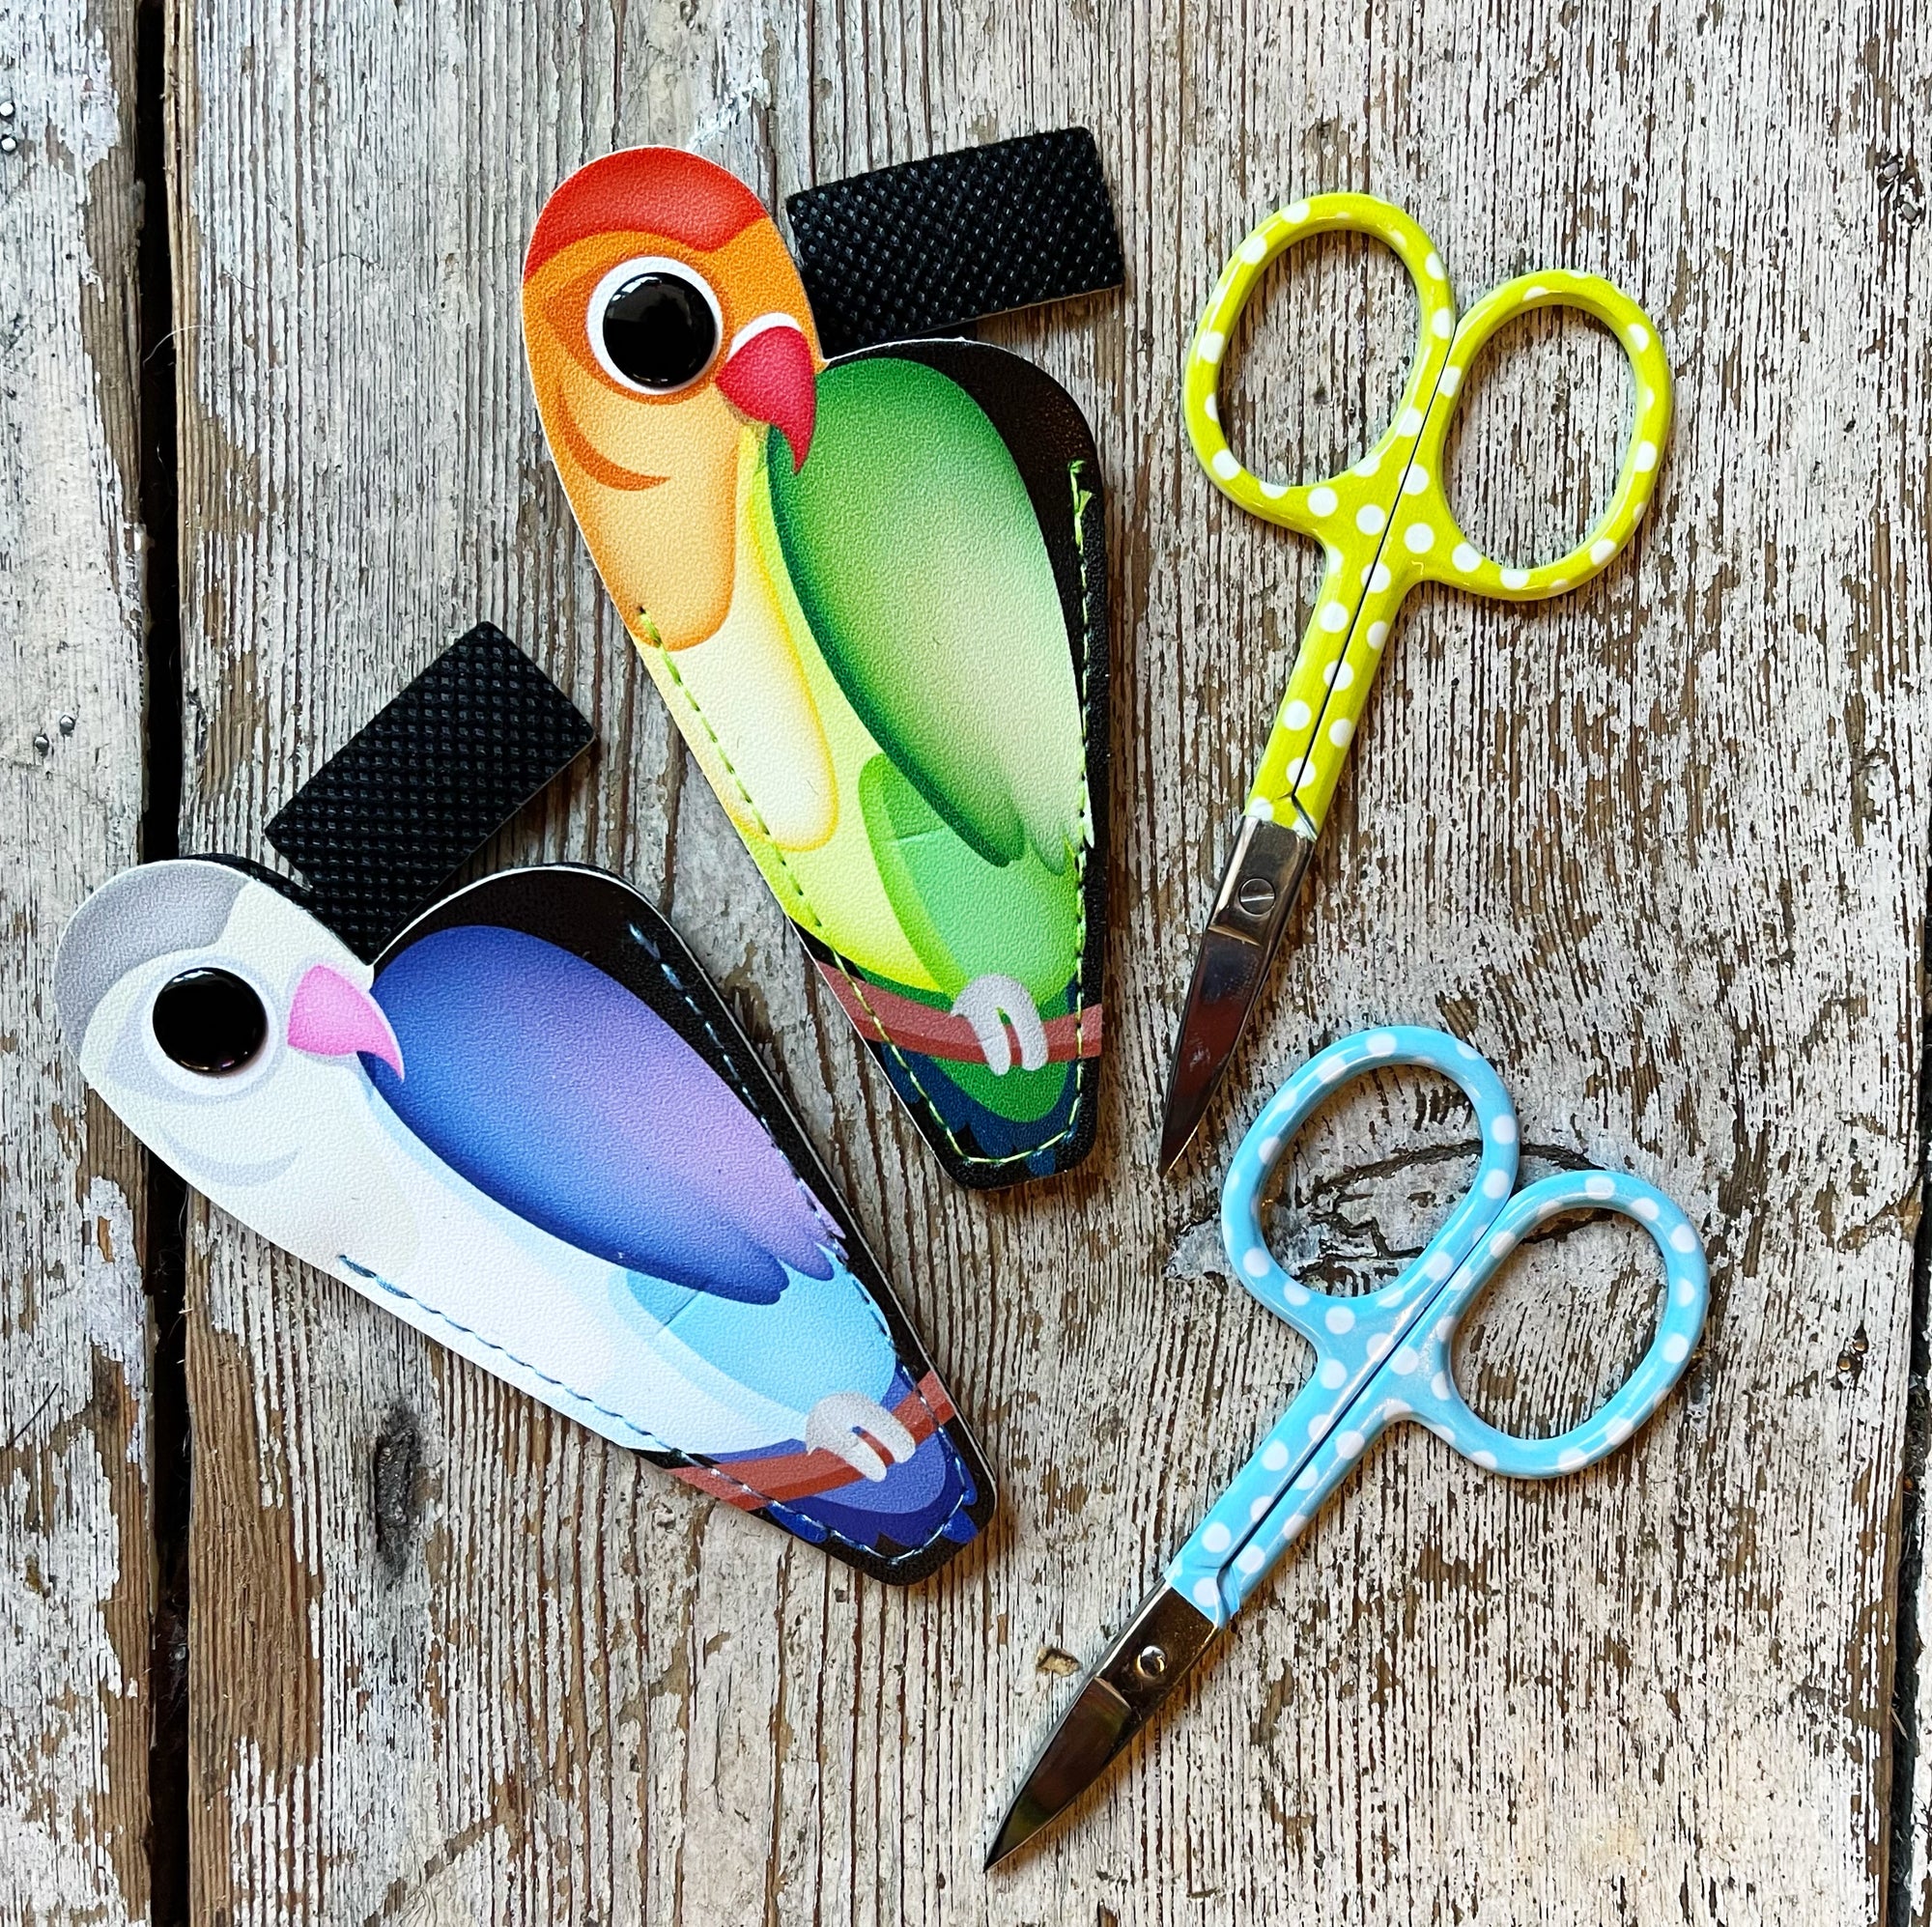 Parrot Scissors with Case tribeyarns